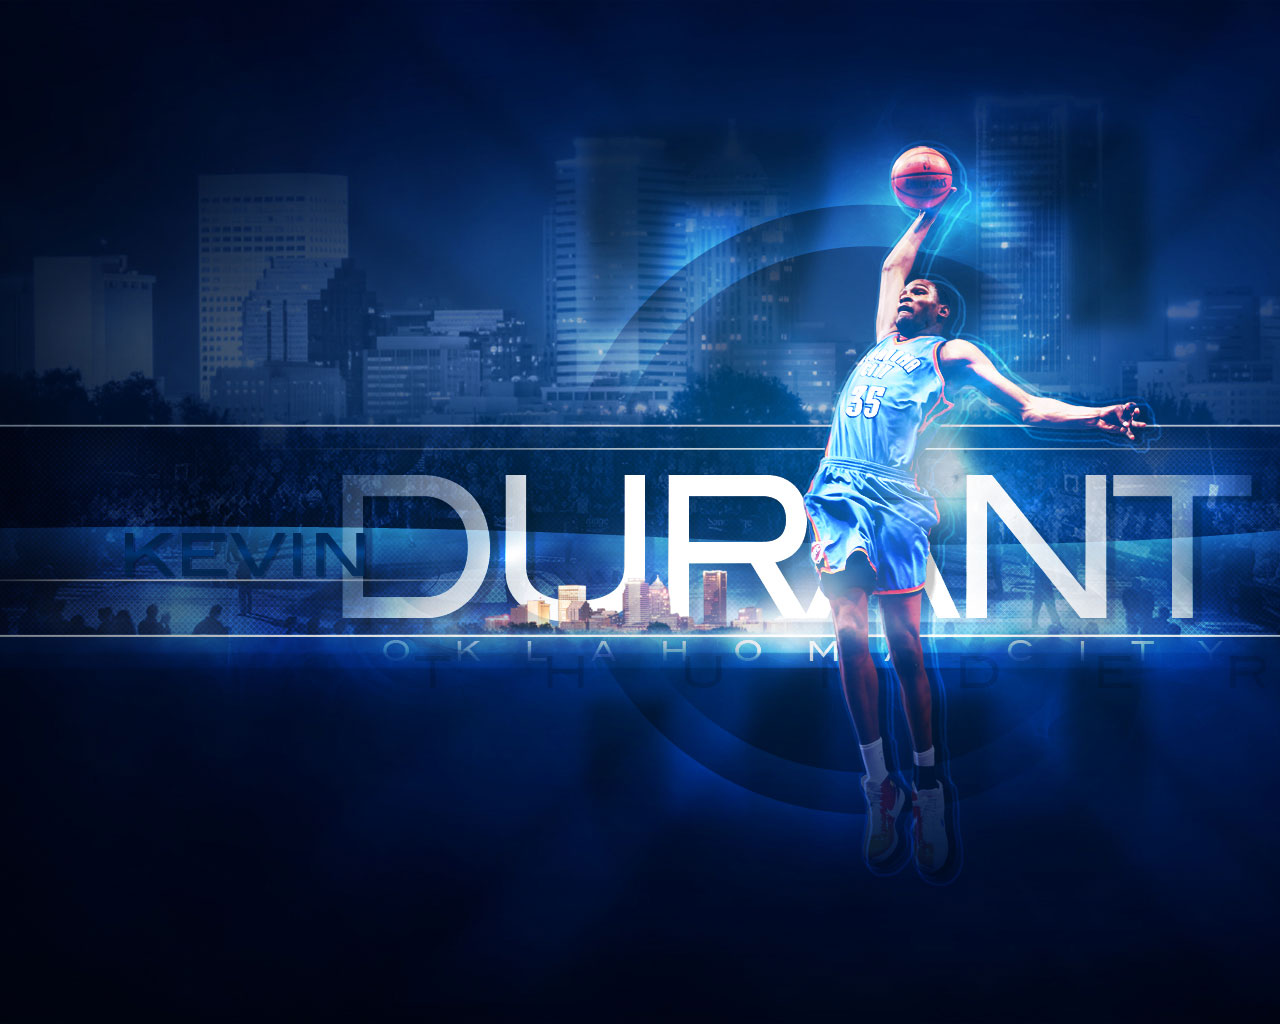 Kevin Durant New HD Wallpaper Its All About Basketball